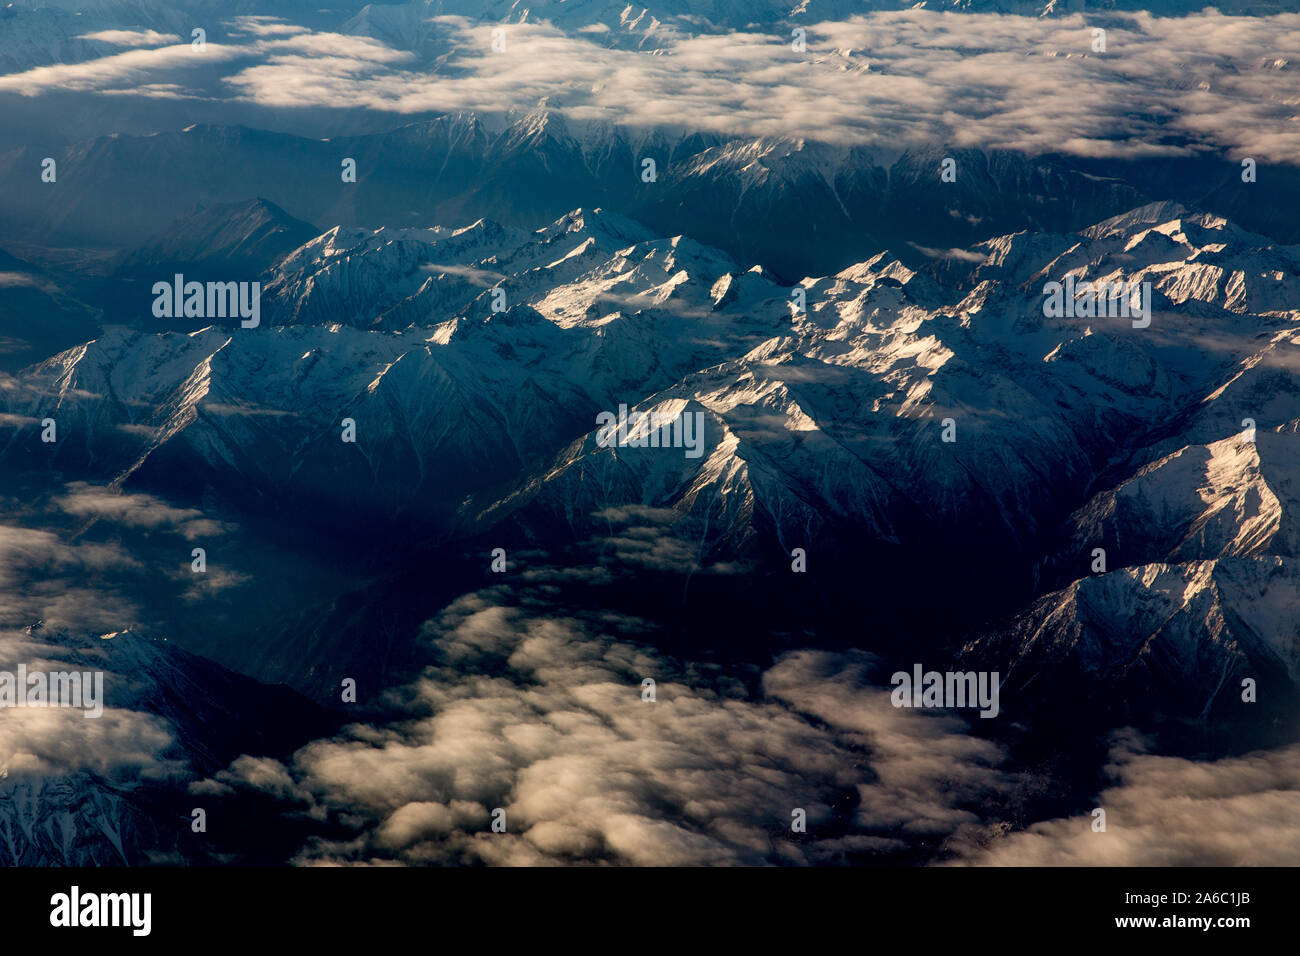 Aerial photograph on a flight from Chengdu, China to Lhasa, Tibet of the Hengduan Mountains in the region historically called the Kham. Stock Photo